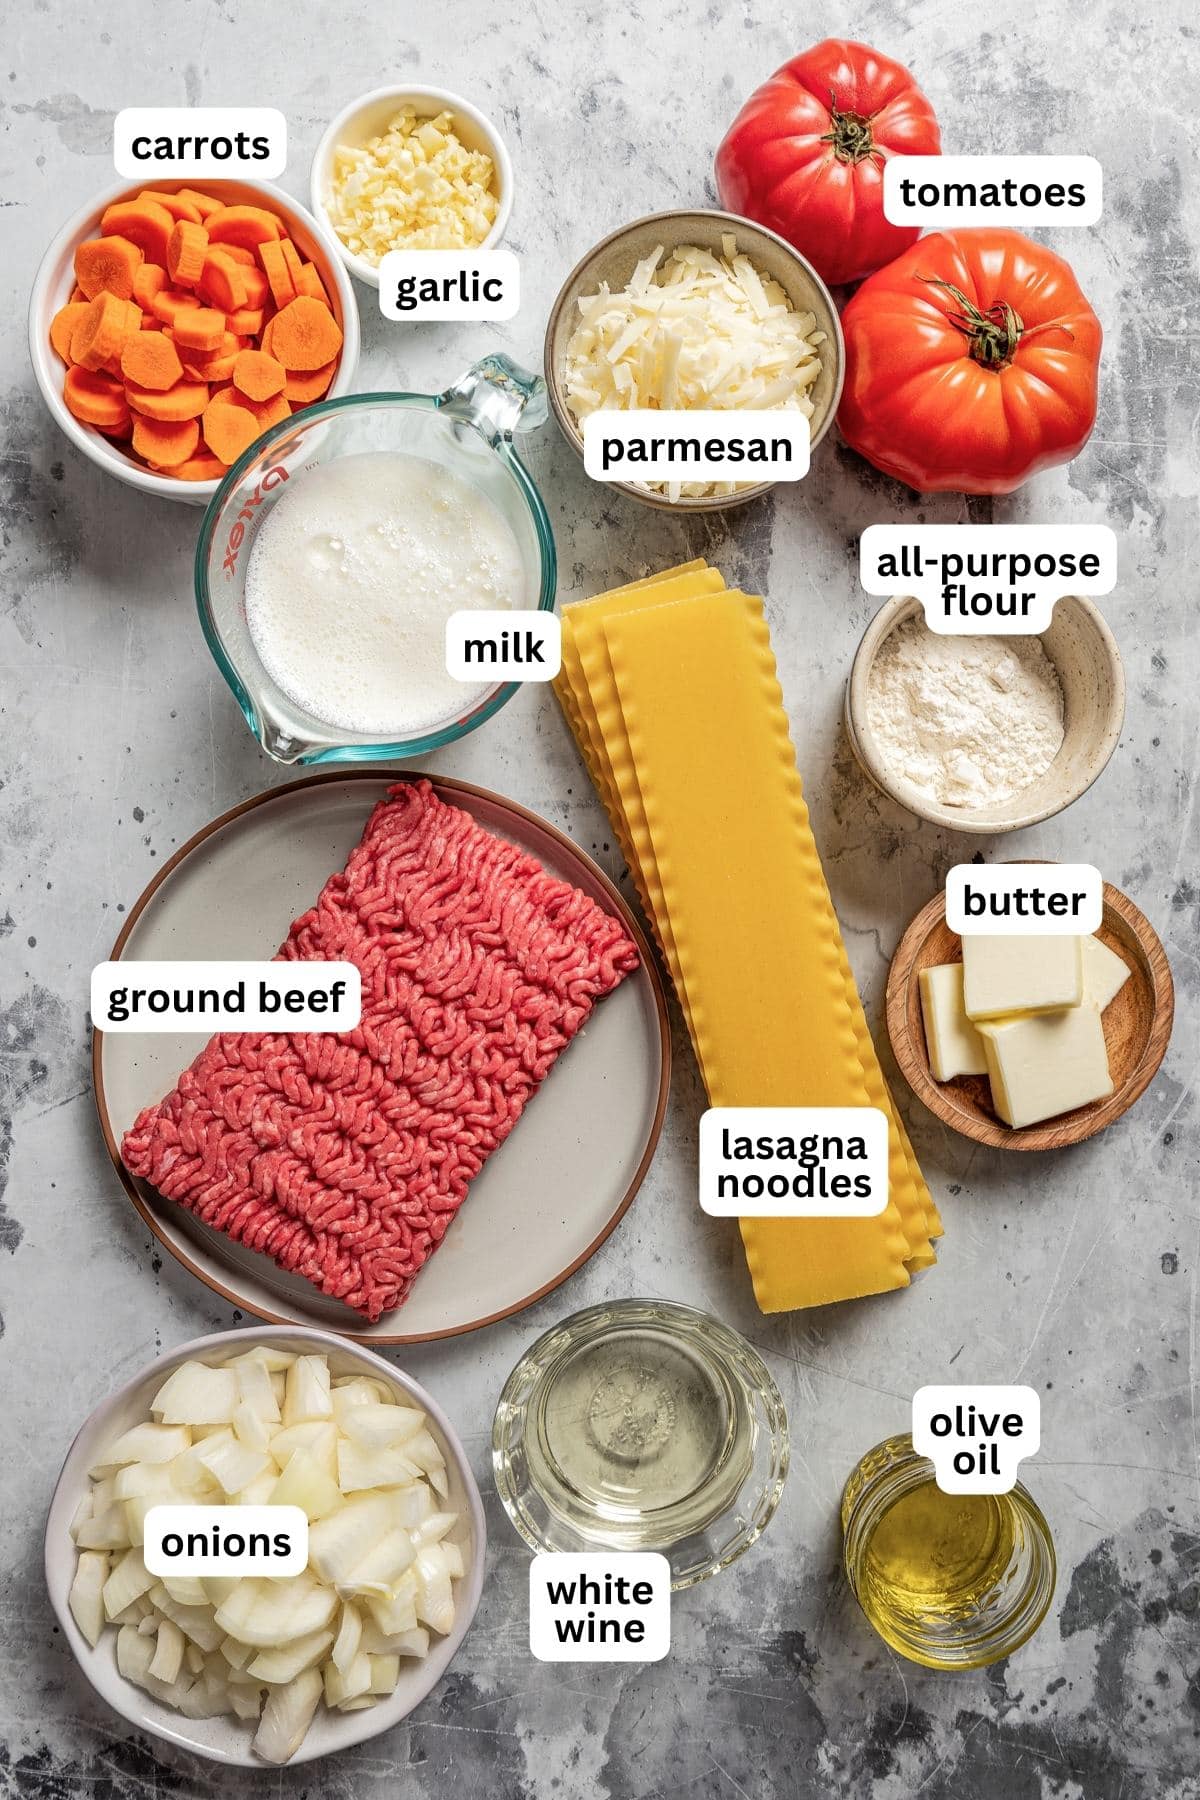 Image of all the ingredients used for lasagna bolognese.